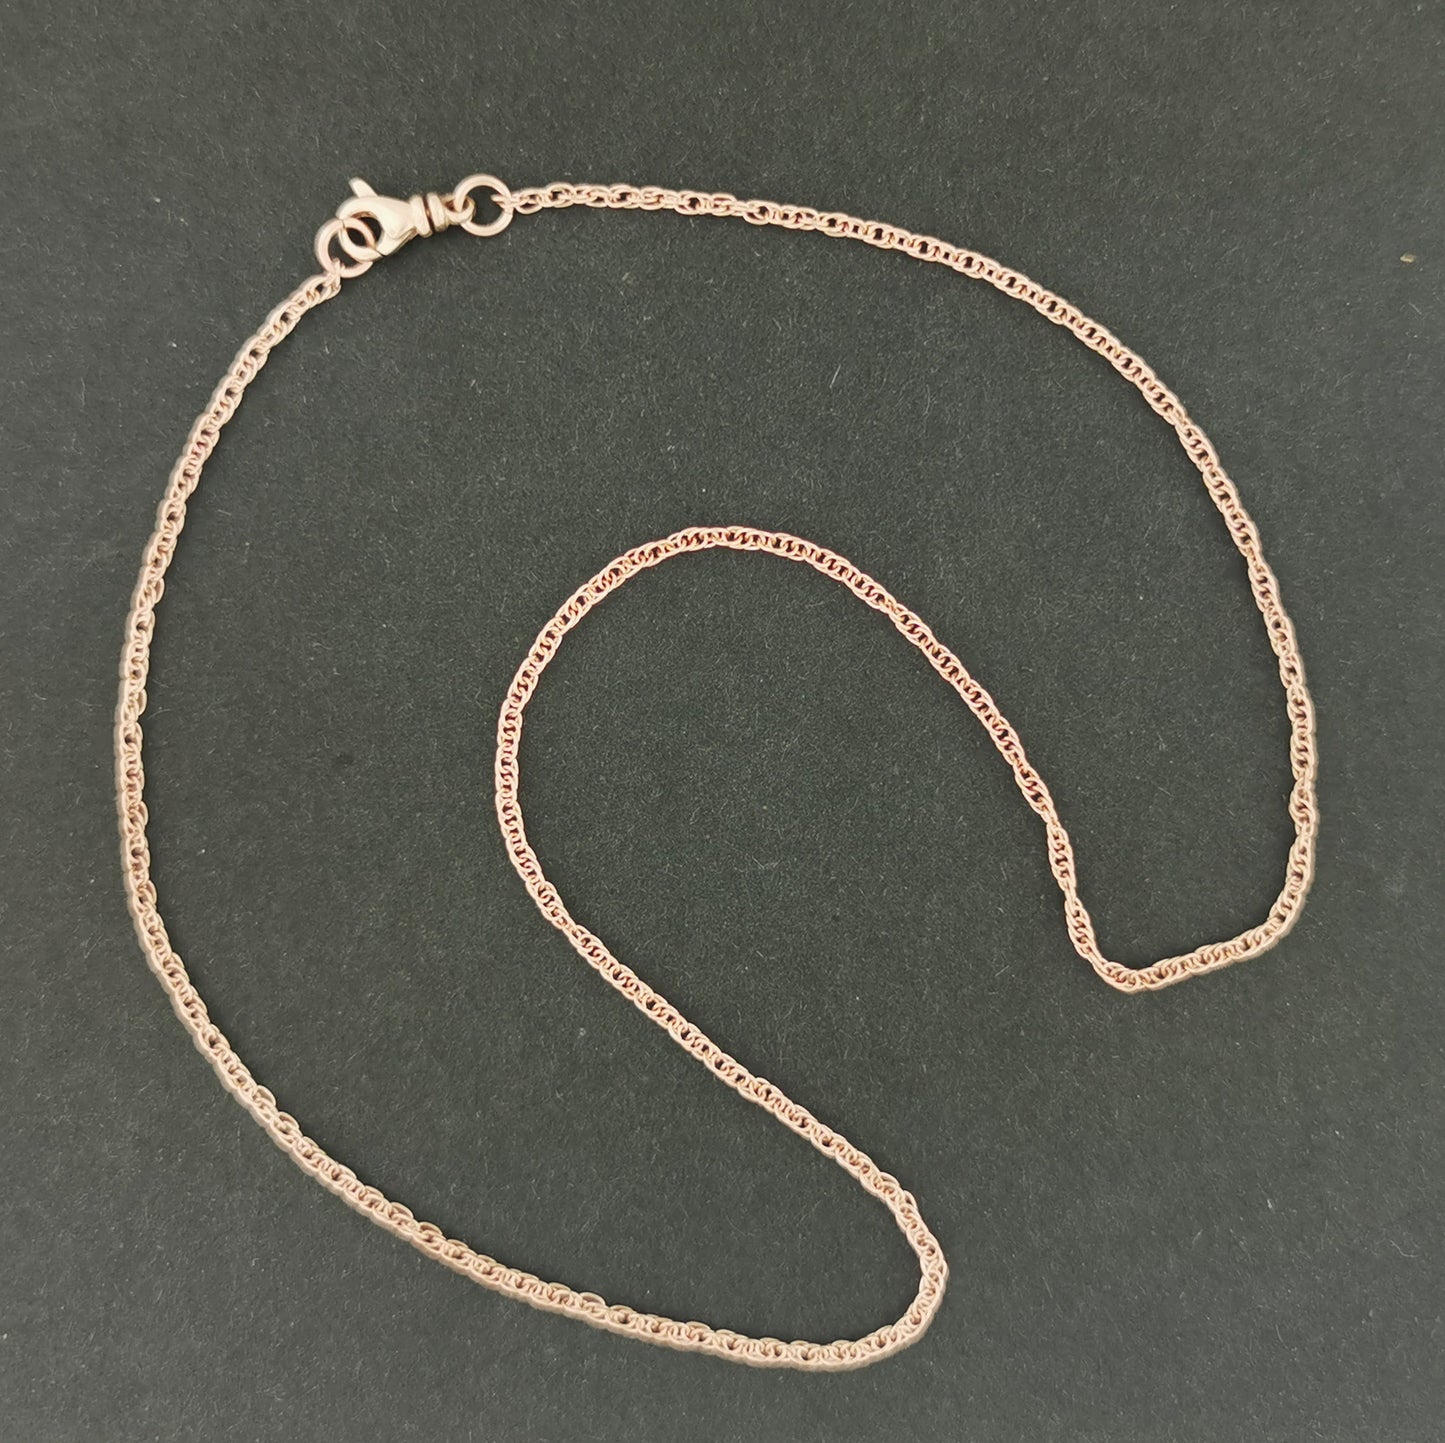 Antique Bronze Rope Chain 1.8mm Made to Order, bronze cable chain, bronze chain, cable chain, necklace chain, bronze necklace chain, 1.8mm chain, 1.8mm bronze chain, bronze chain jewelry, bronze chain jewellery, chain jewelry chain jewellery, bronze jewellery, bronze jewelry, 1.8mm chain necklace, 1.8mm bronze chain necklace